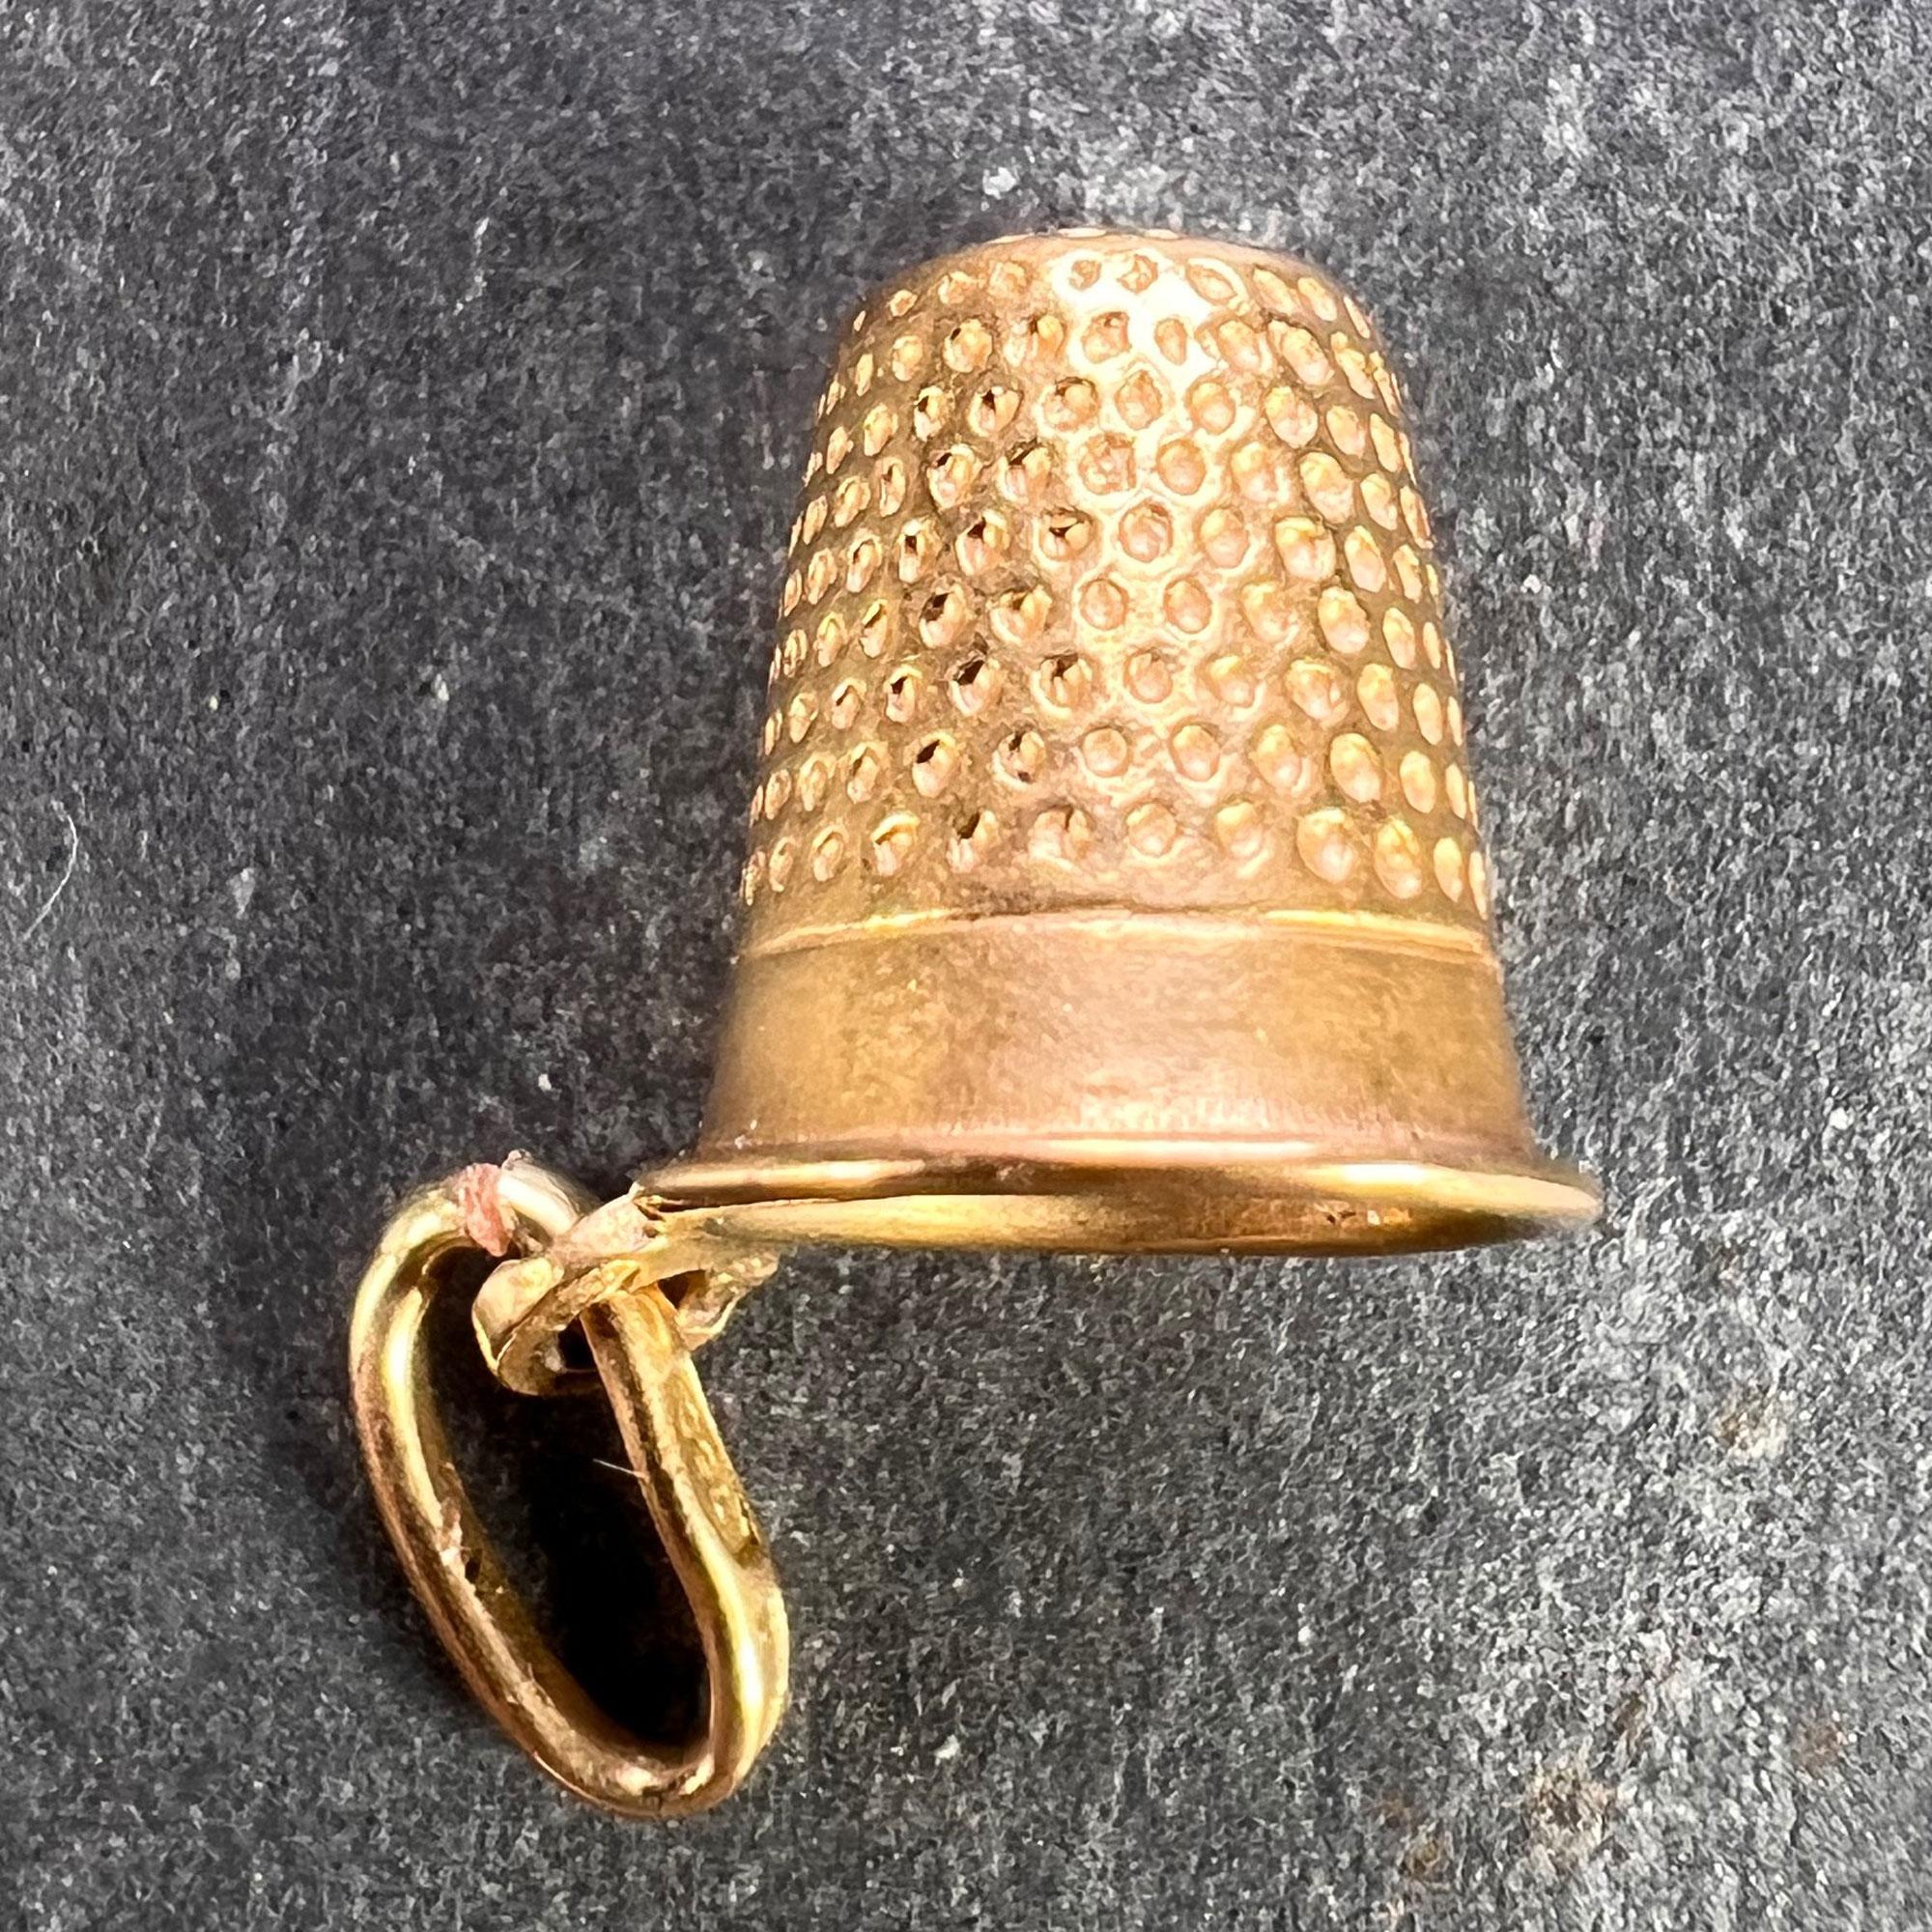 An Italian 18 karat (18K) yellow gold charm pendant designed as a thimble. Stamped 750 for 18 karat gold with an indistinct Italian maker's mark, along with French import marks for 18 karat gold.

Dimensions: 1 x 1.2 x 0.9 cm (not including jump